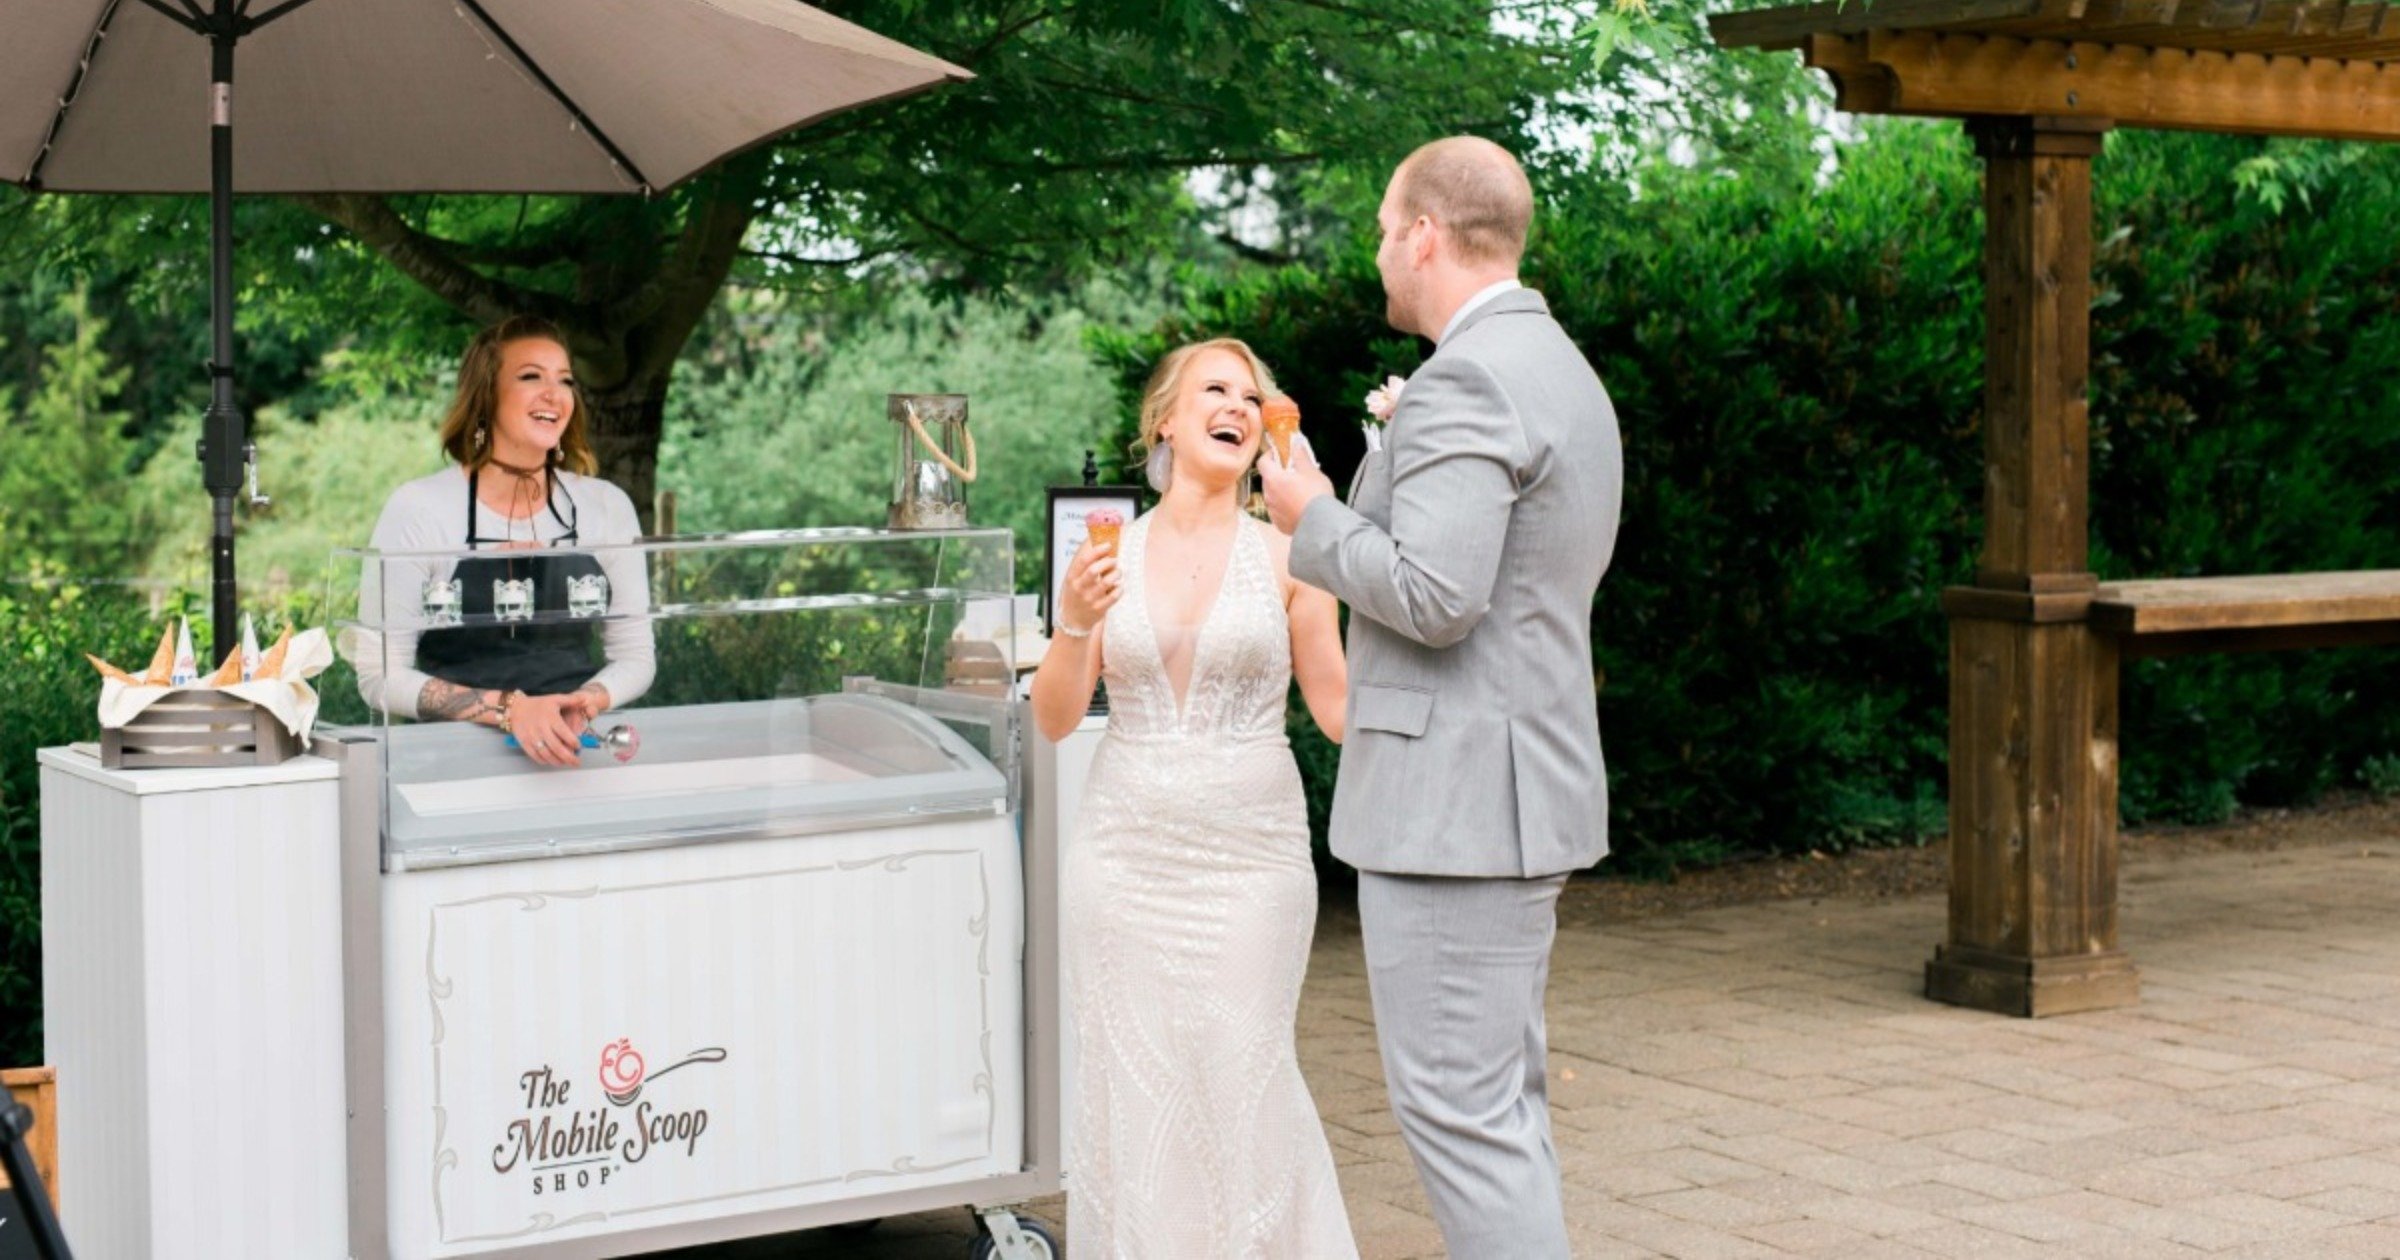 The Most Fun and Memorable Mobile Carts For Your Wedding